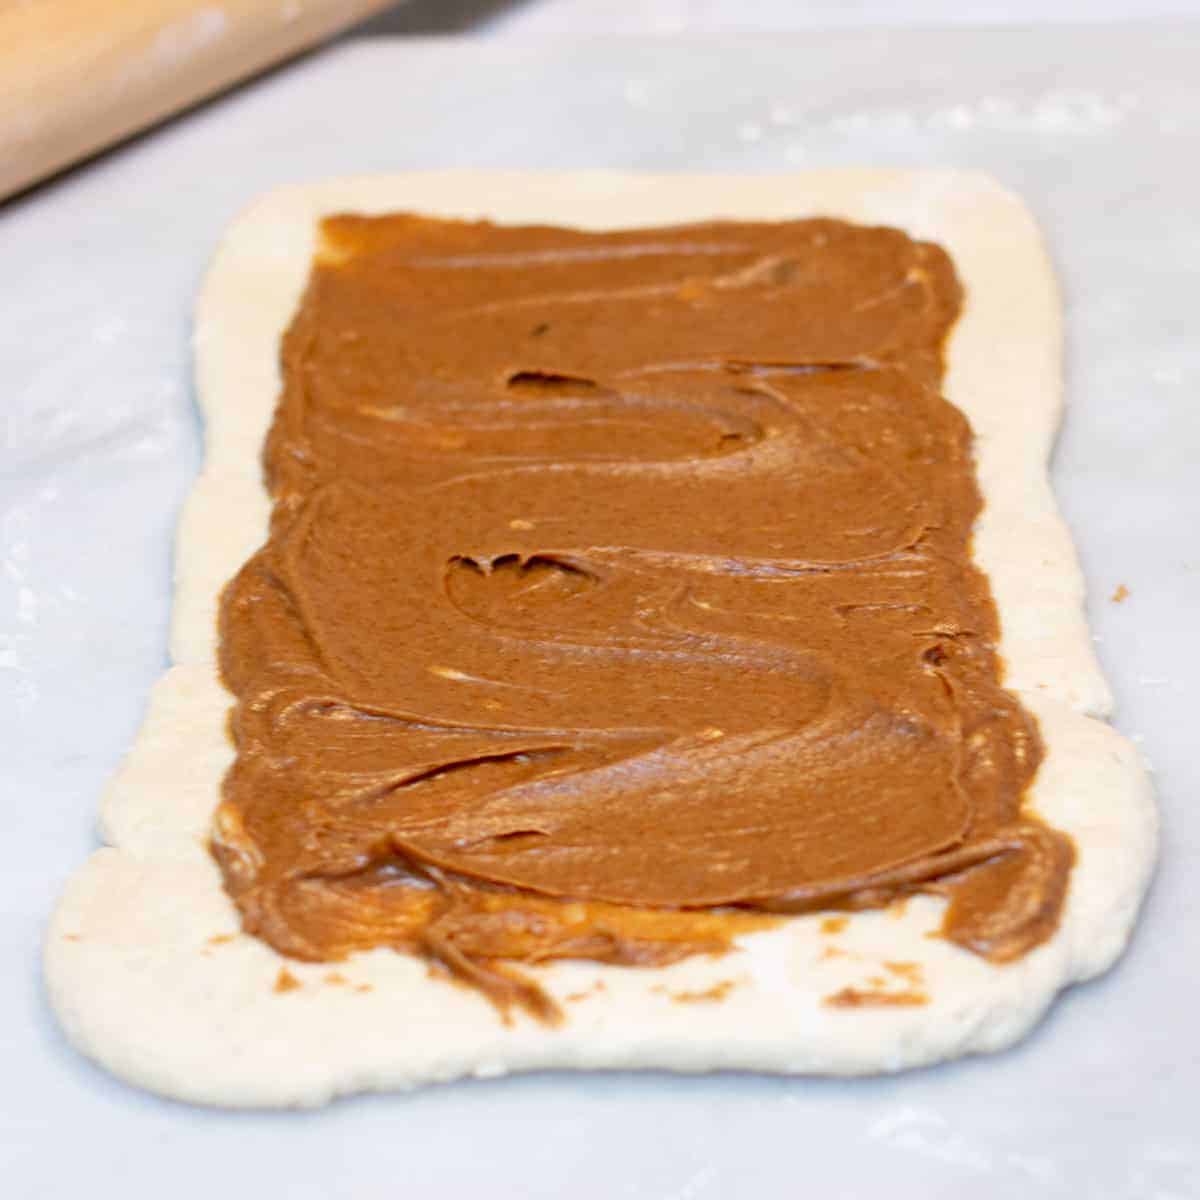 cinnamon roll filling spread over rolled out biscuit dough.